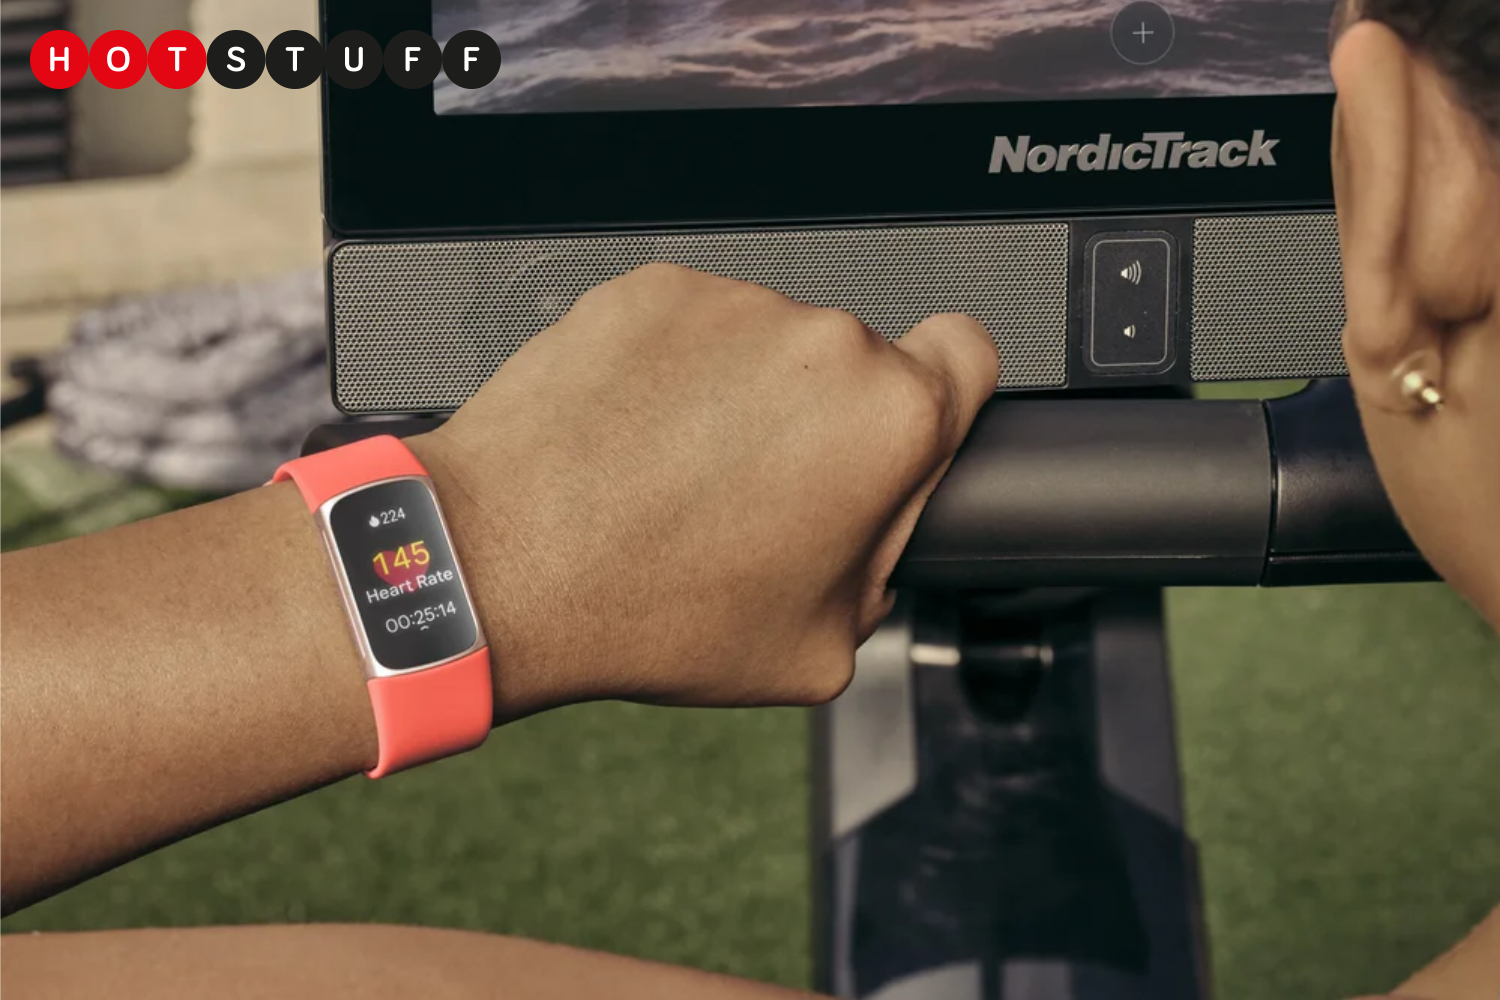 Fitbit Charge 6 Rumors : Upcoming Fitness Tracker Leaks? 